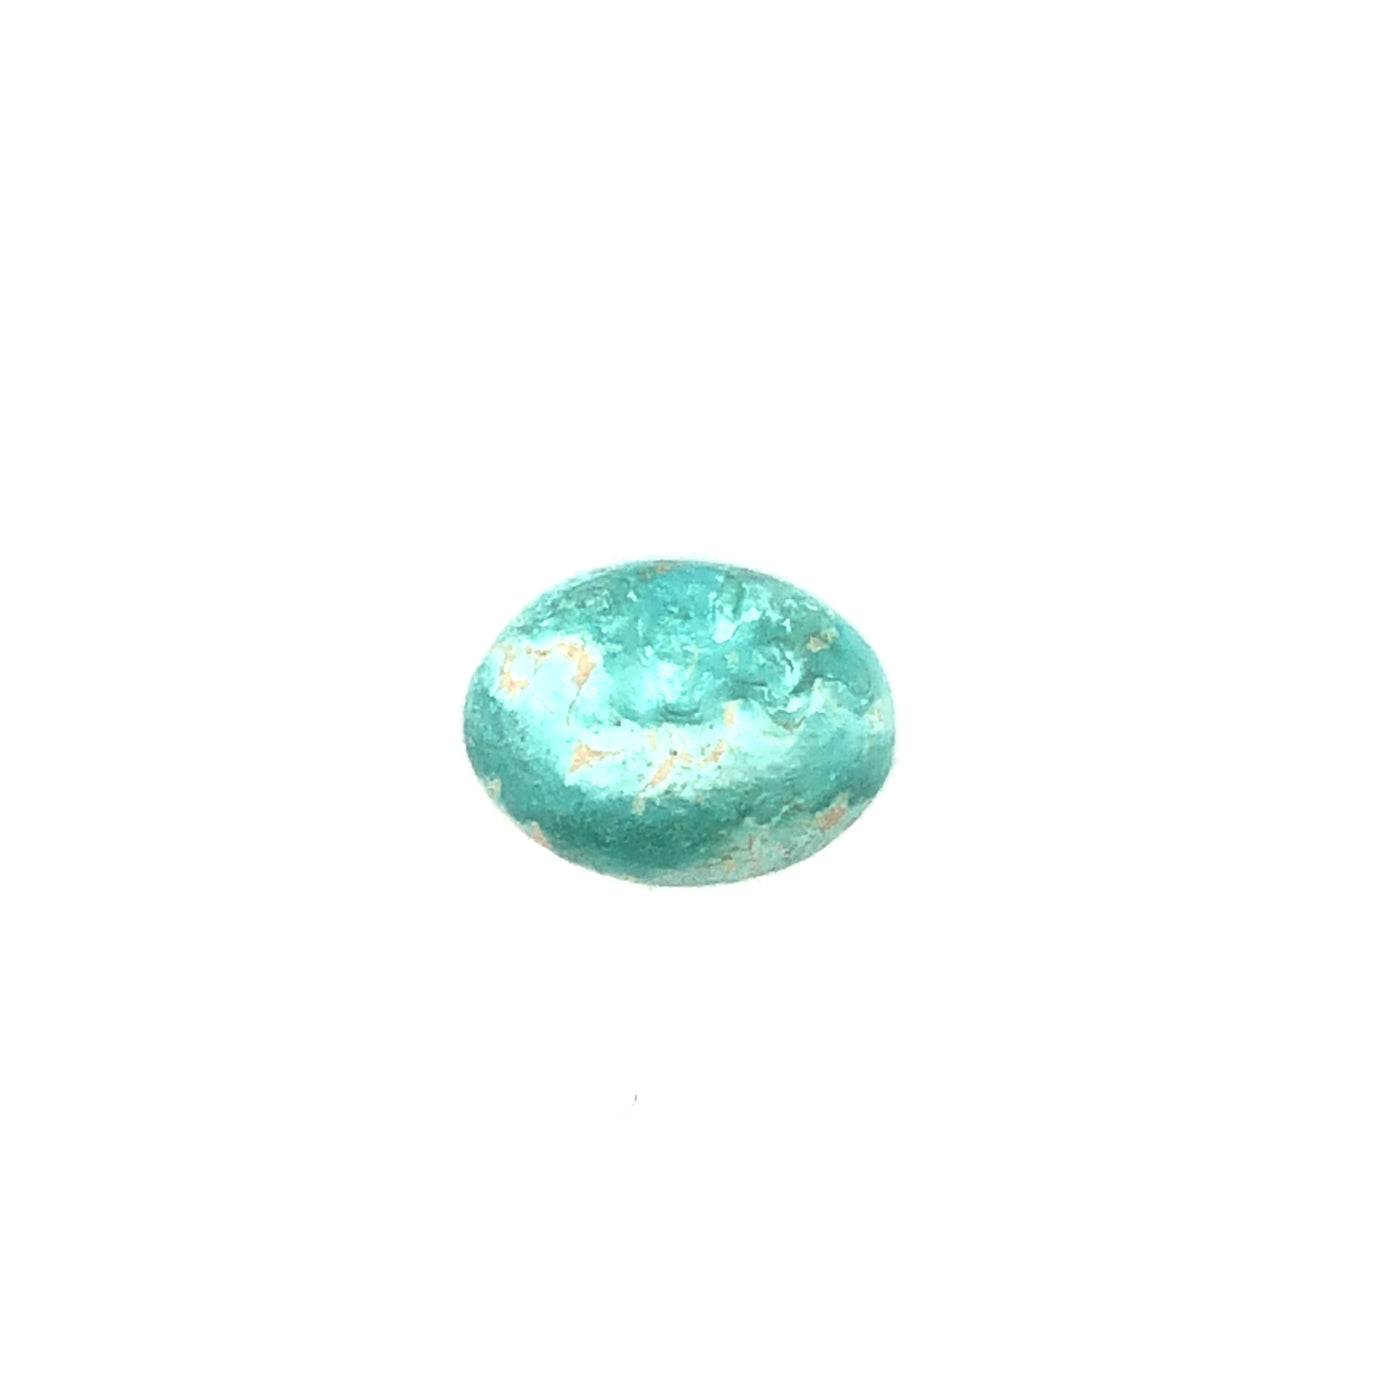 Loose Narooma Turquoise Oval Shaped 11.22Ct Blue With Some White